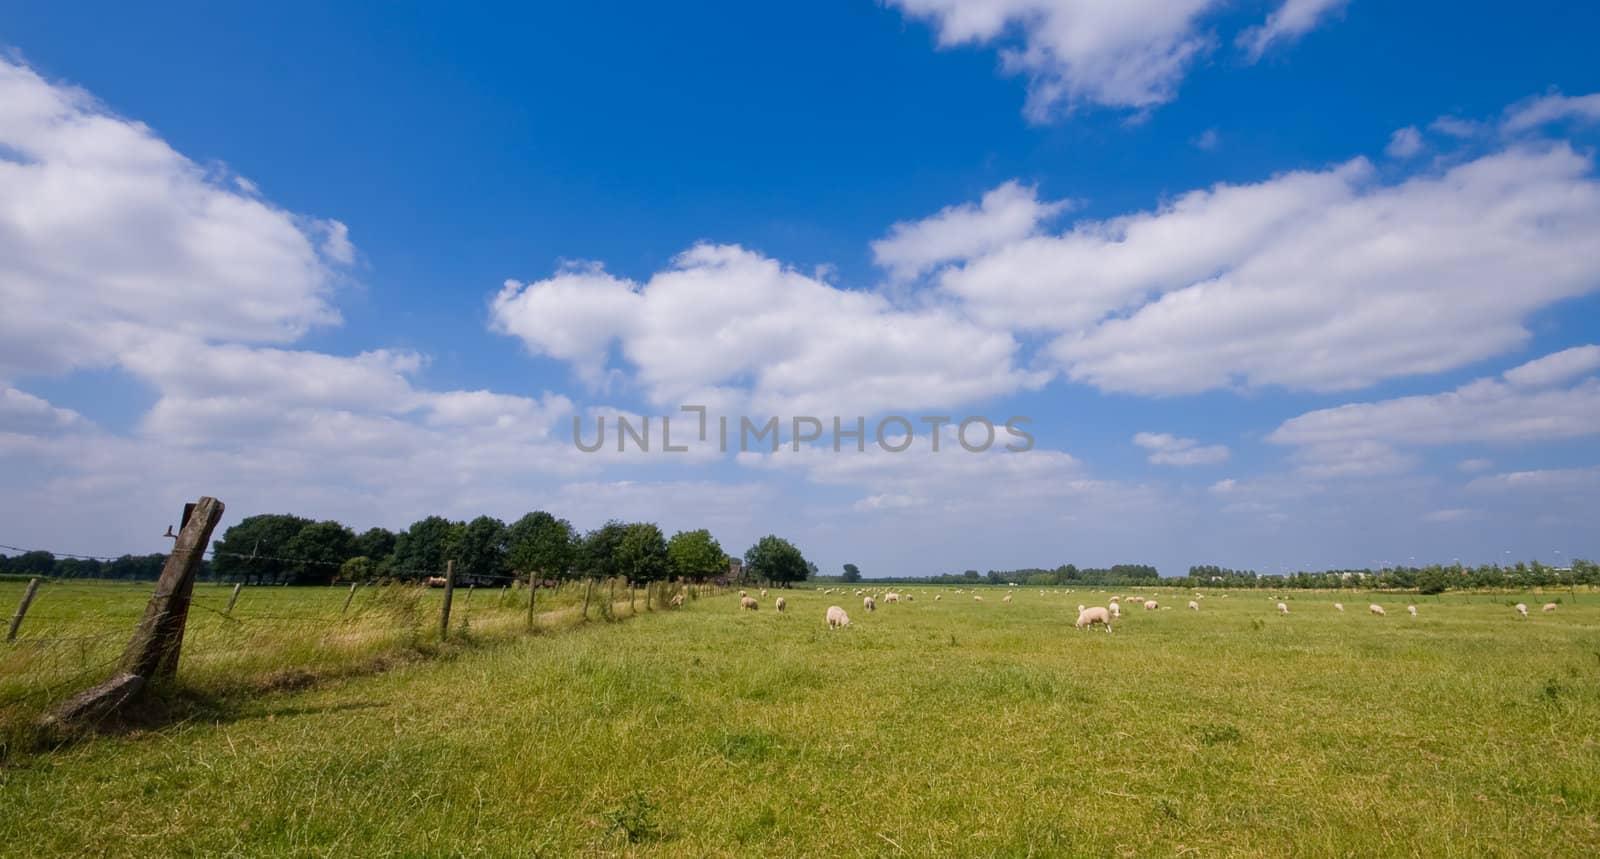 landscape with sheep on a rural meadow with blue cloudy sky